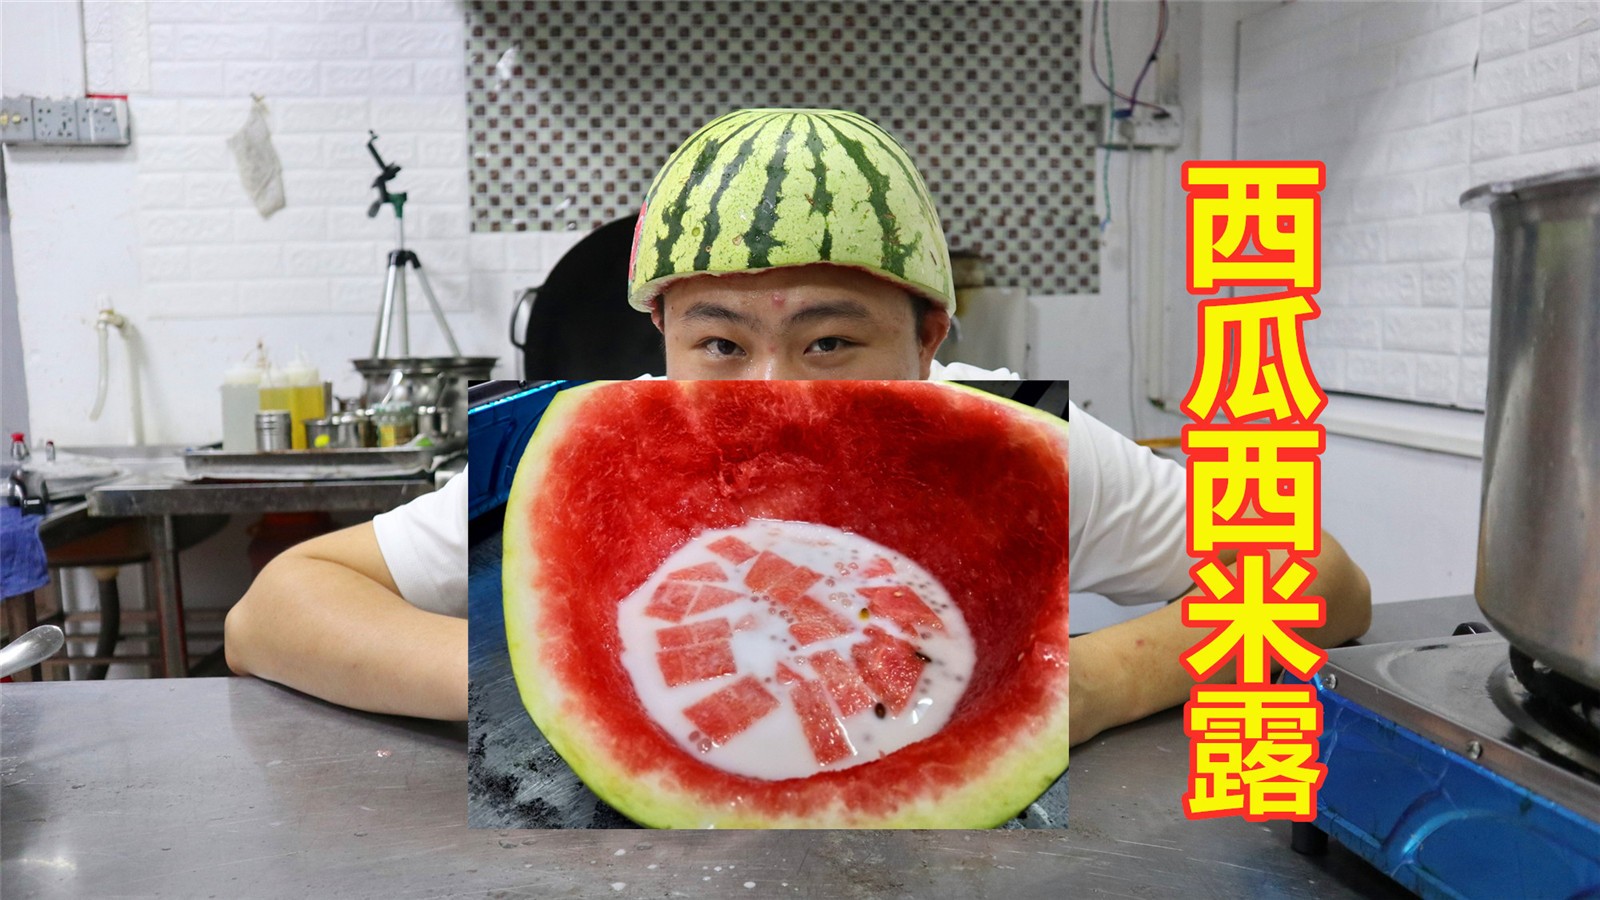 It took so long to drink Cantonese sugar water to know that "Watermelon and Similu" did this? Don't you learn?